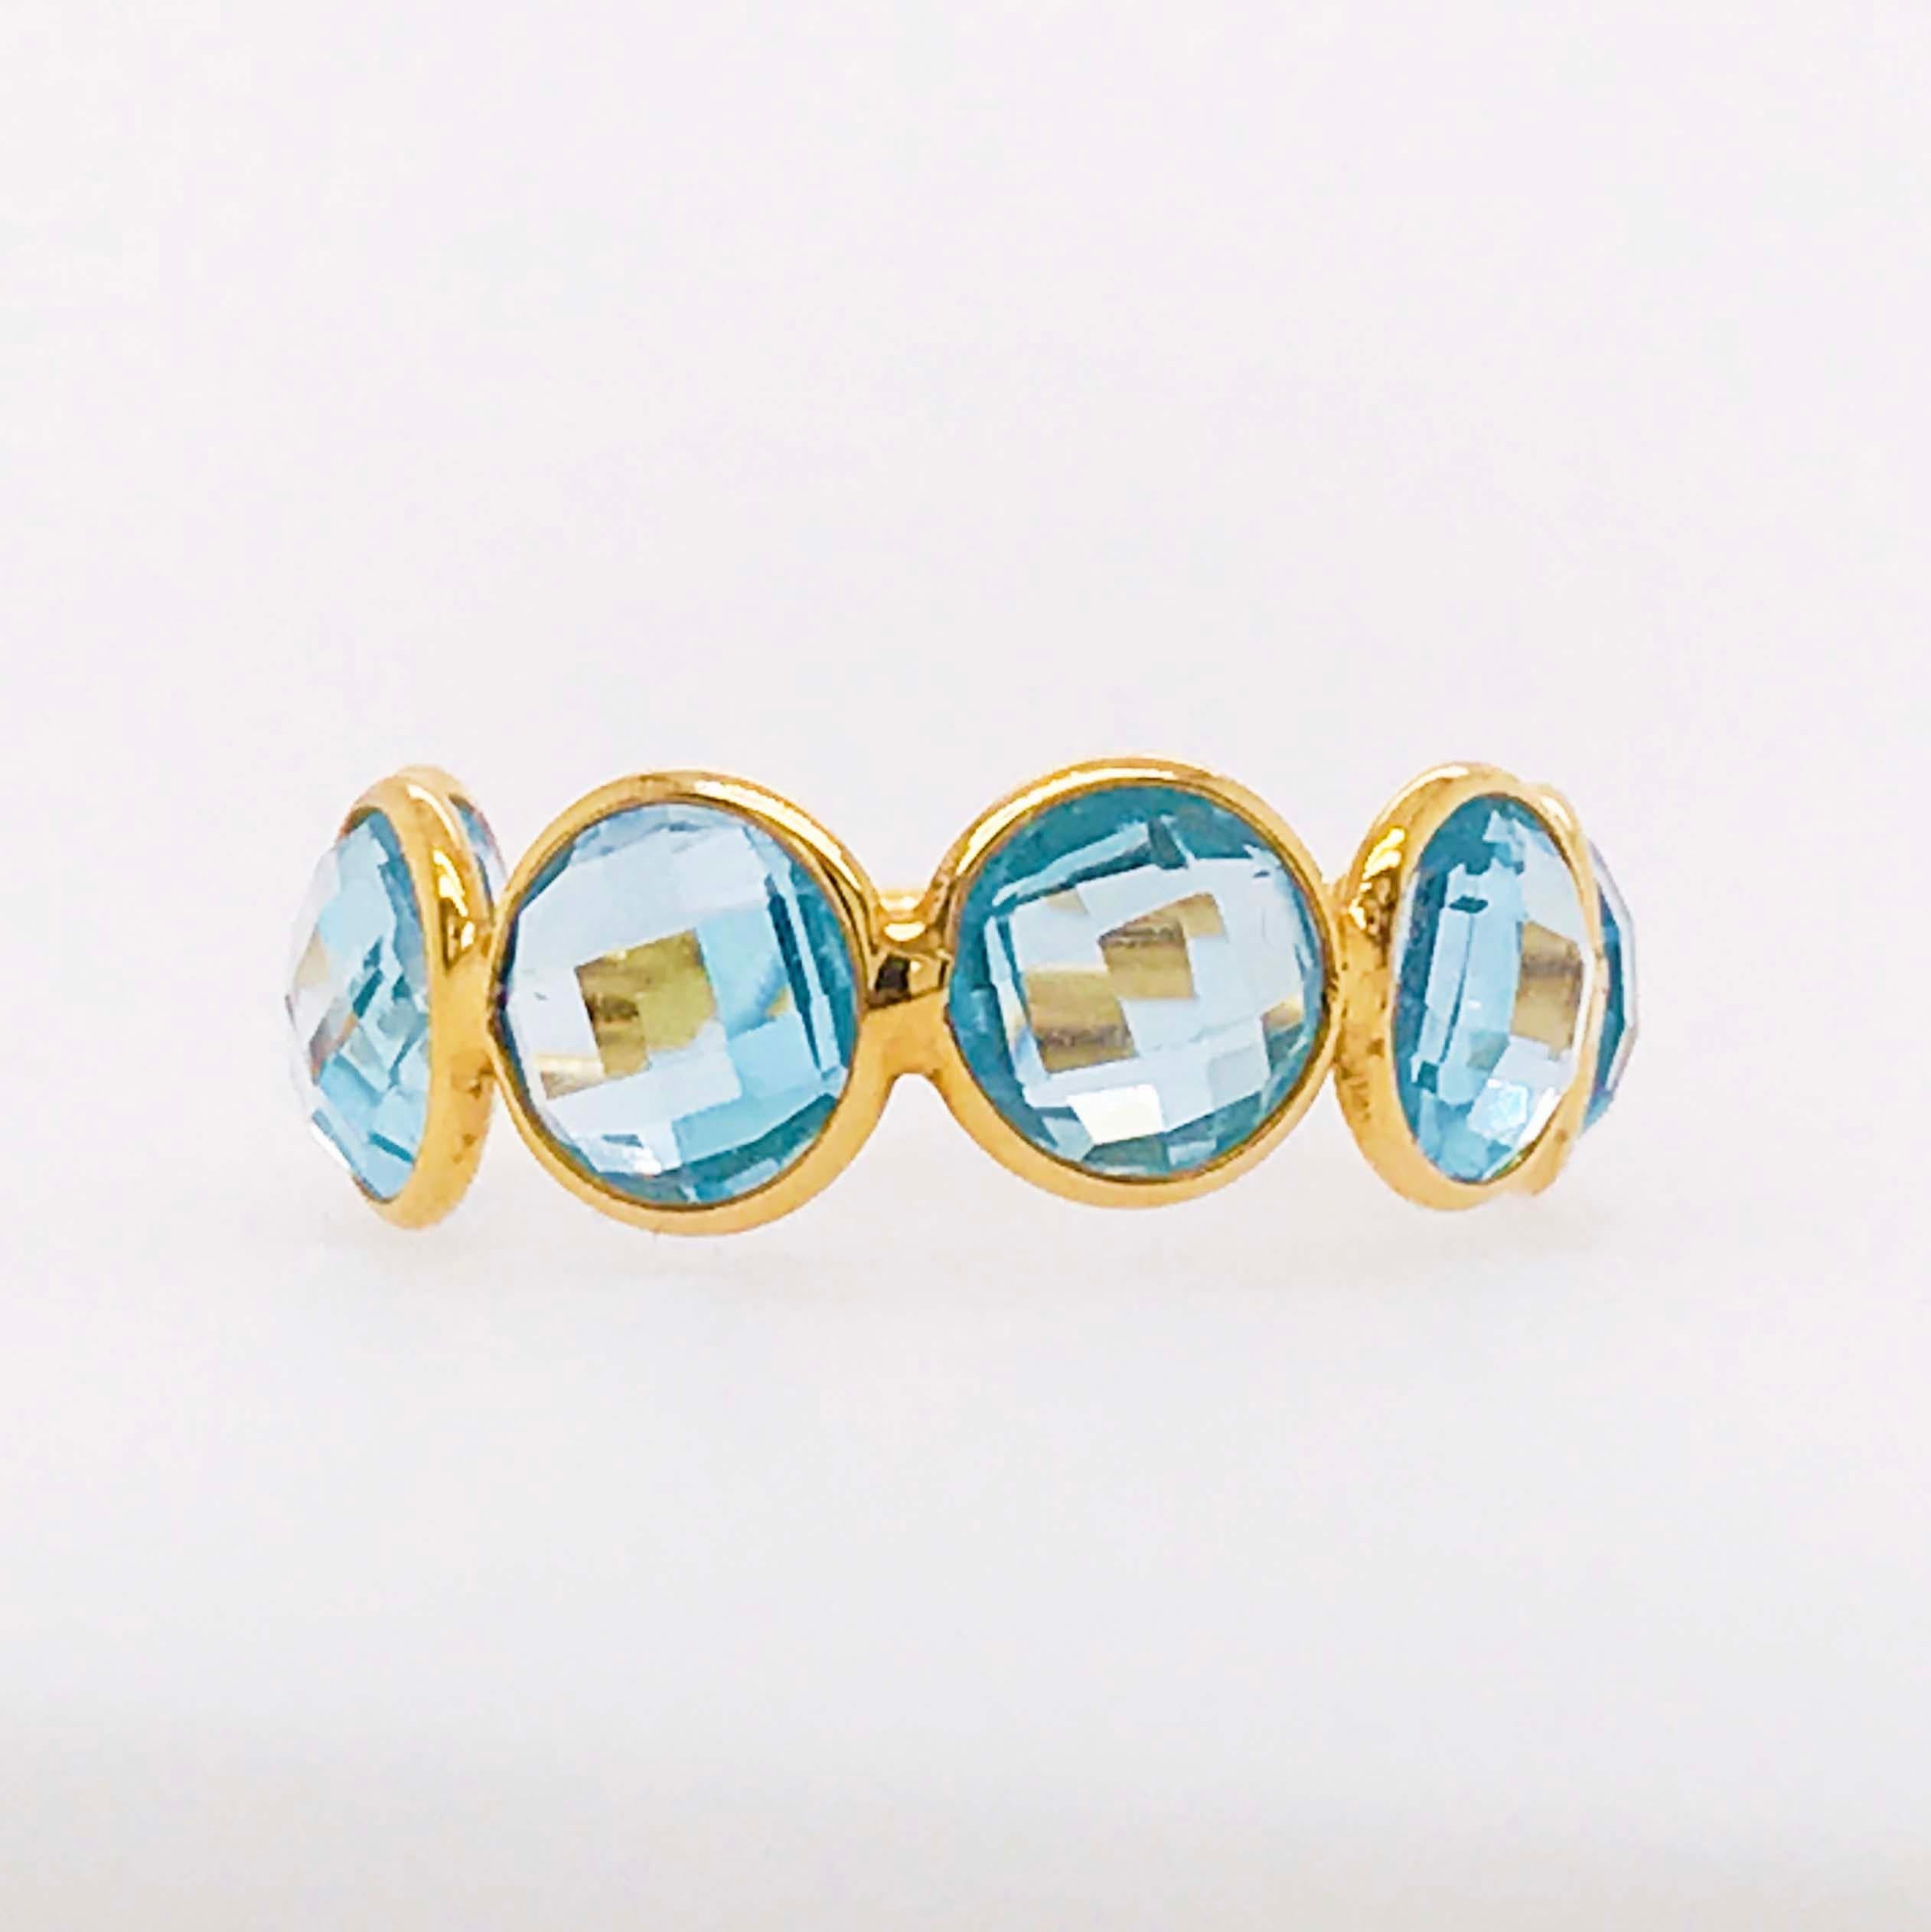 The adjustable, genuine blue topaz gemstone bezel ring is unique and custom! With genuine, natural blue topaz gemstones going ¾ around the adjustable band this 6 carat total weight ring is 